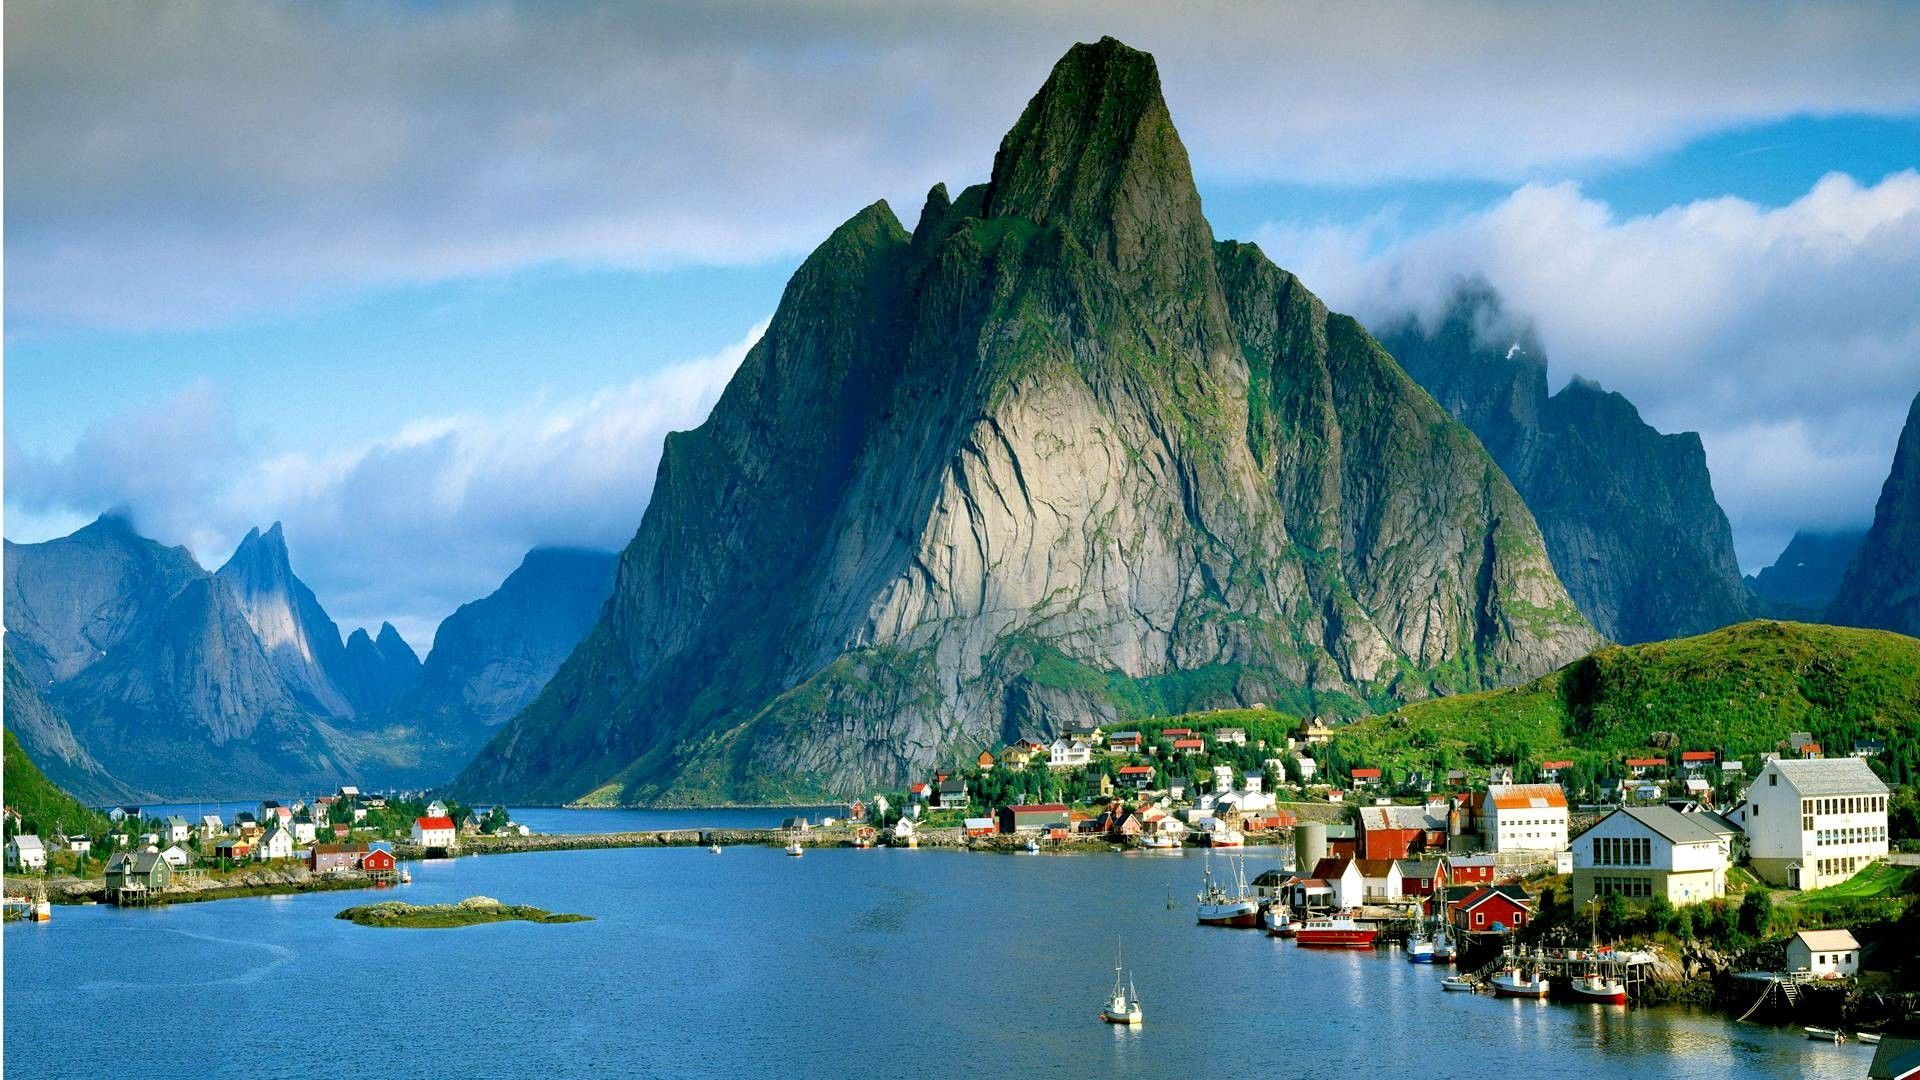 The Fjords Of Norway